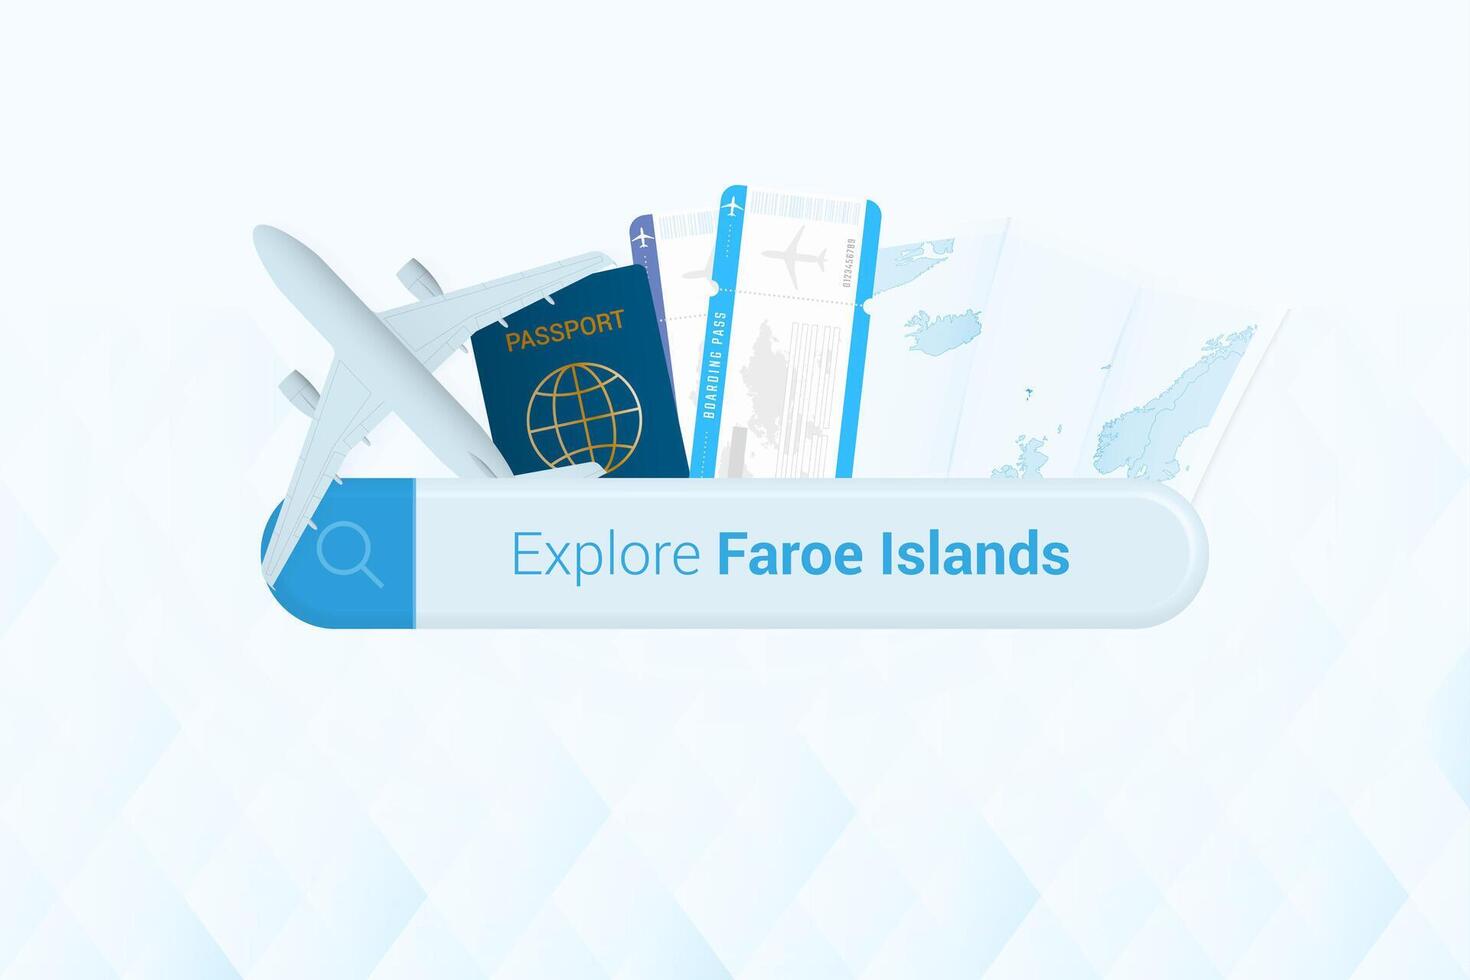 Searching tickets to Faroe Islands or travel destination in Faroe Islands. Searching bar with airplane, passport, boarding pass, tickets and map. vector